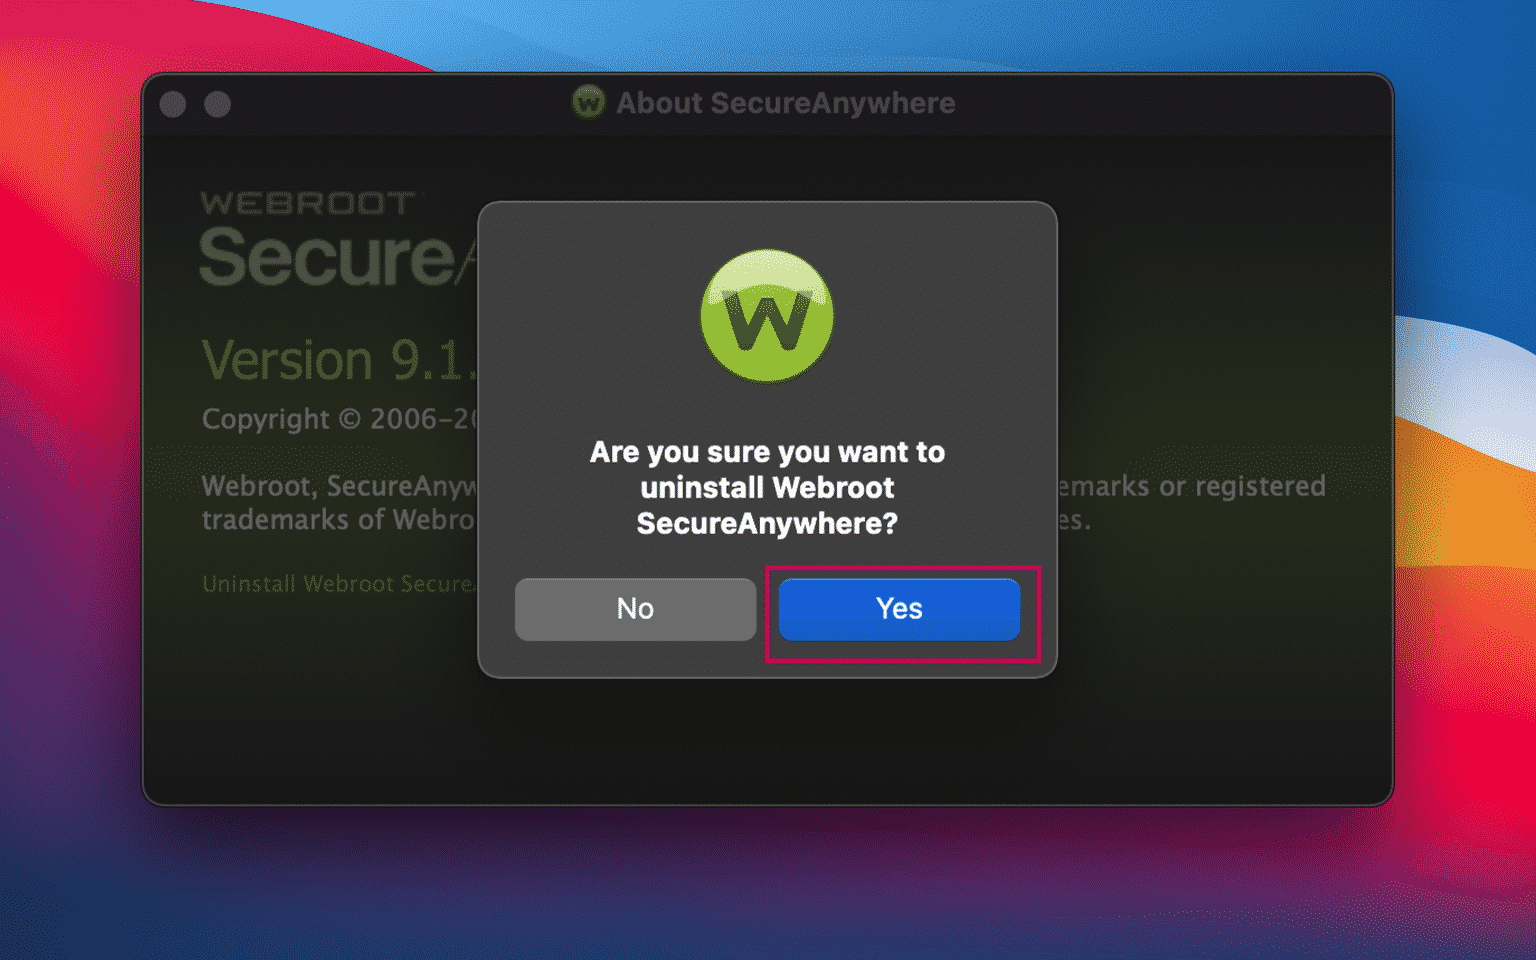 How to uninstall Webroot from your Mac